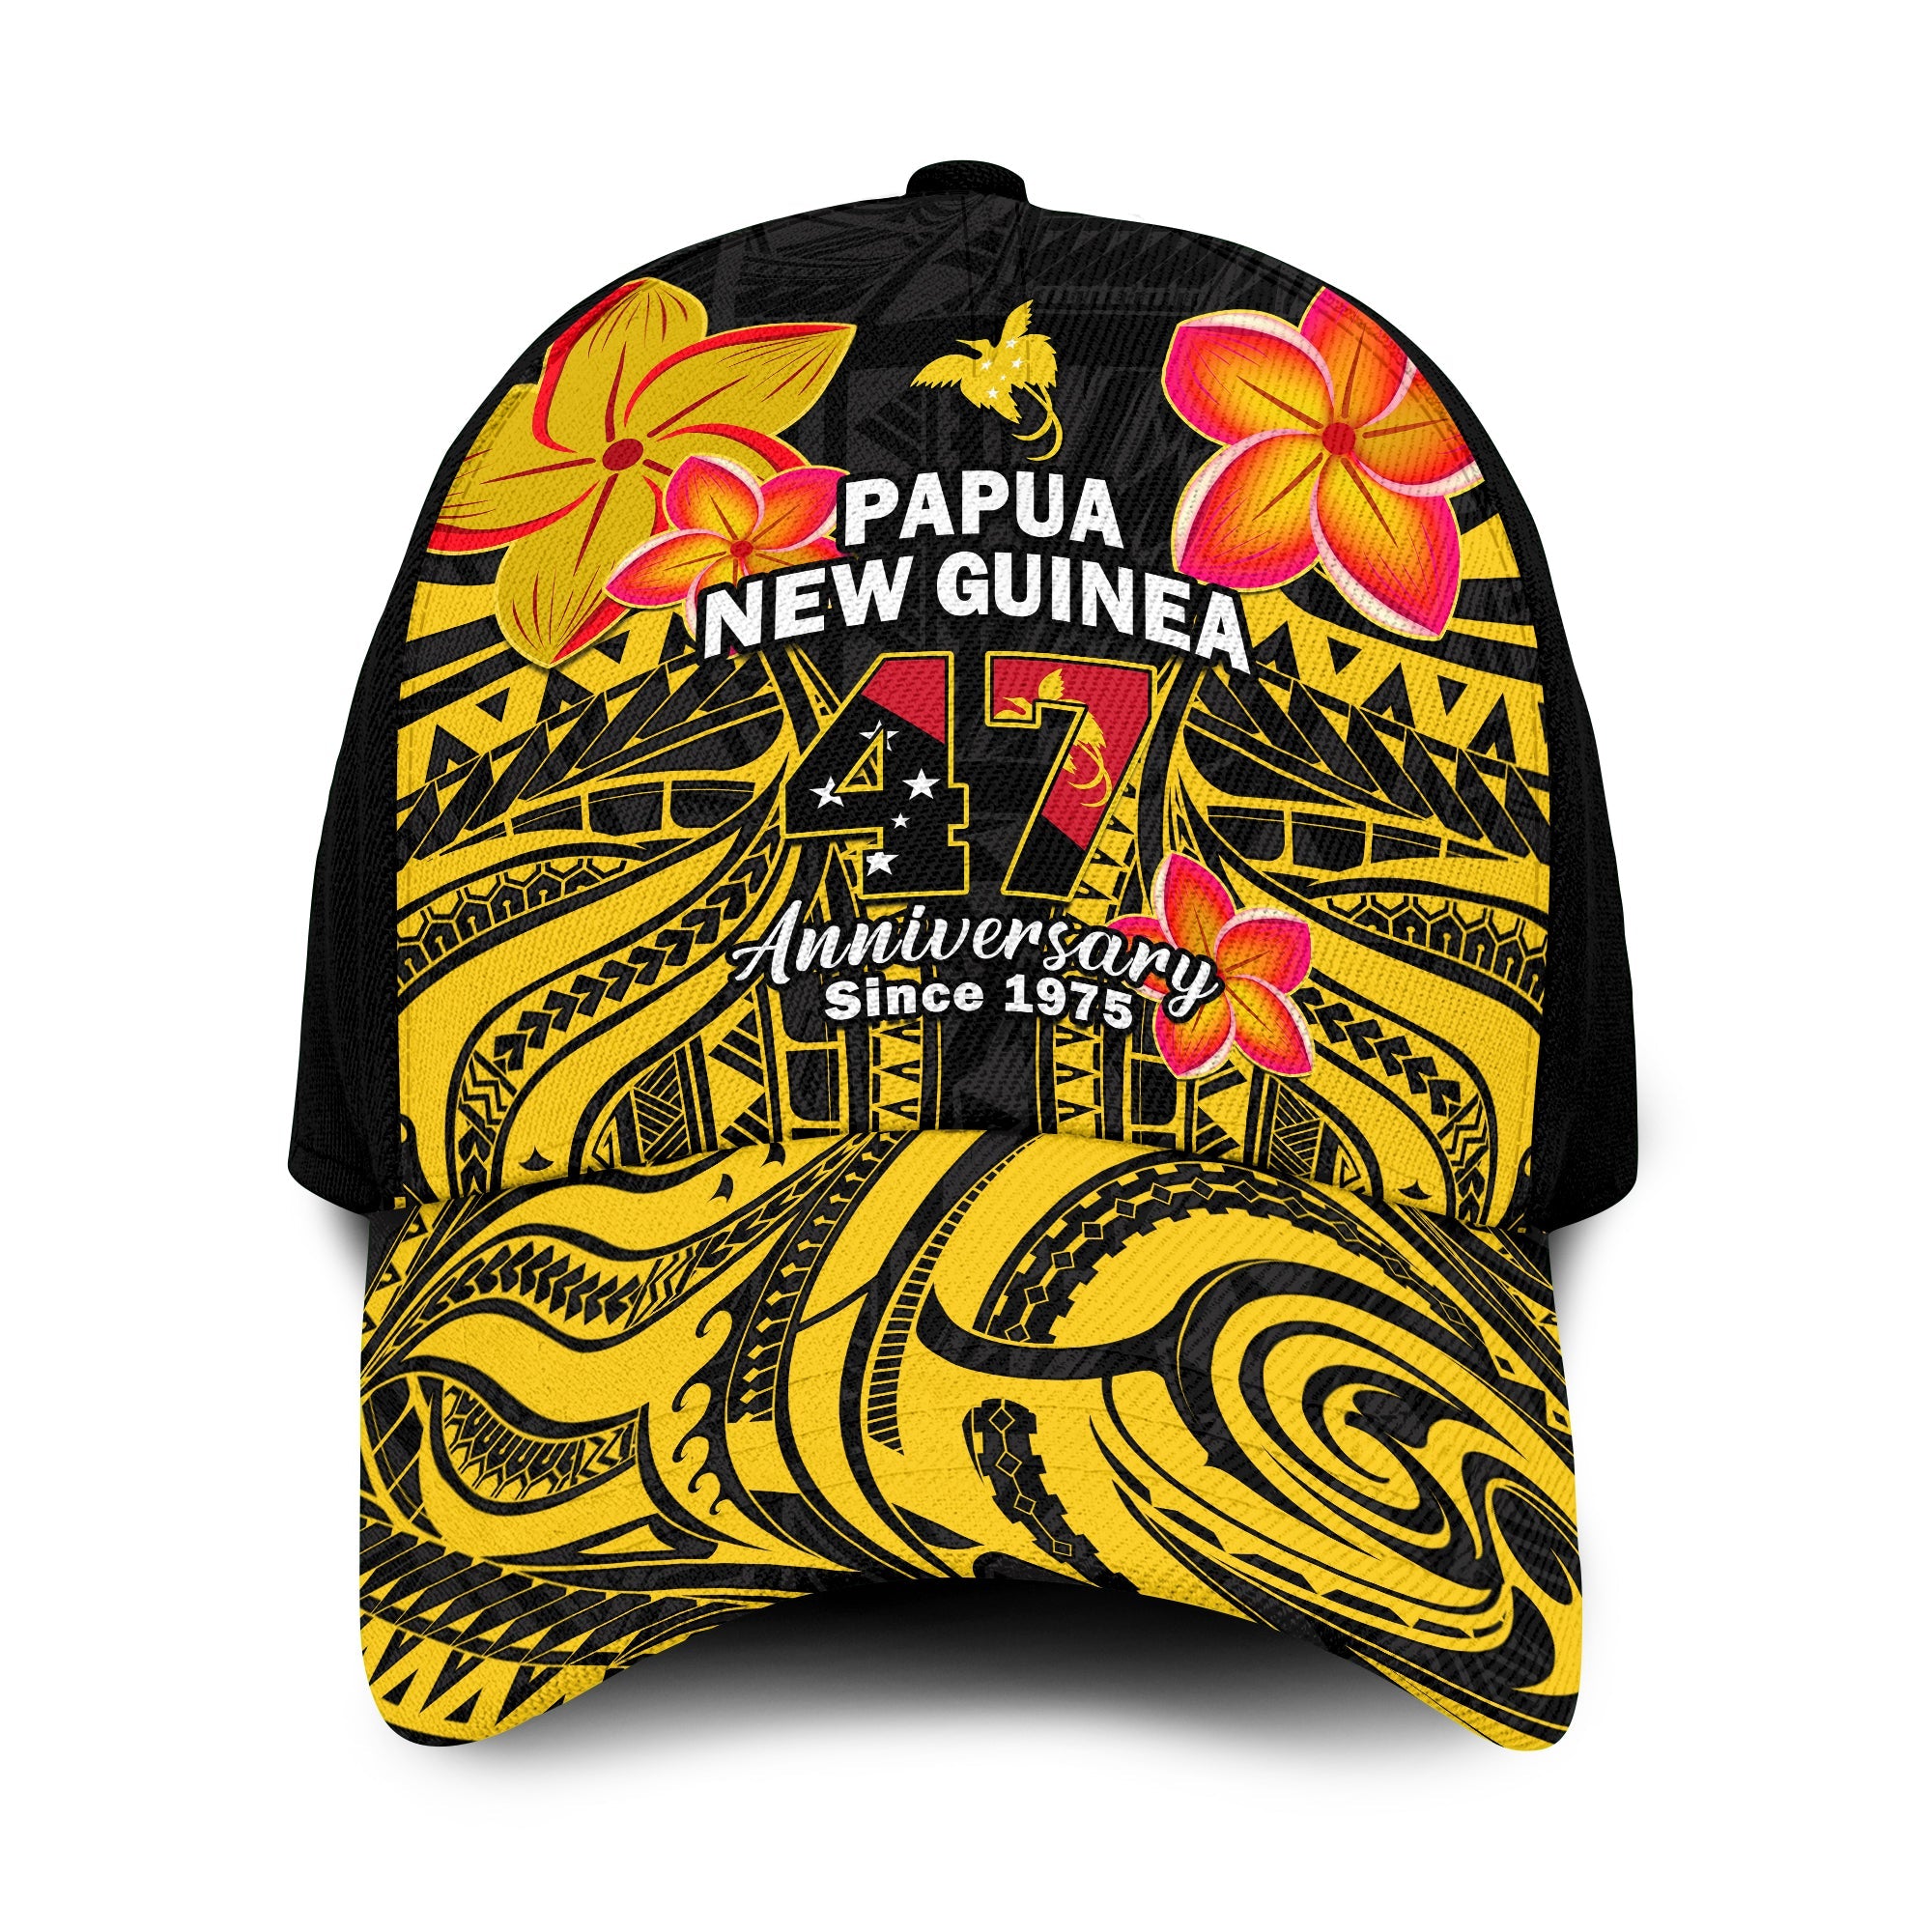 Papua New Guinea Classic Cap PNG 47 Years Independence Anniversary Ver.02 LT14 Classic Cap Universal Fit Yellow - Polynesian Pride